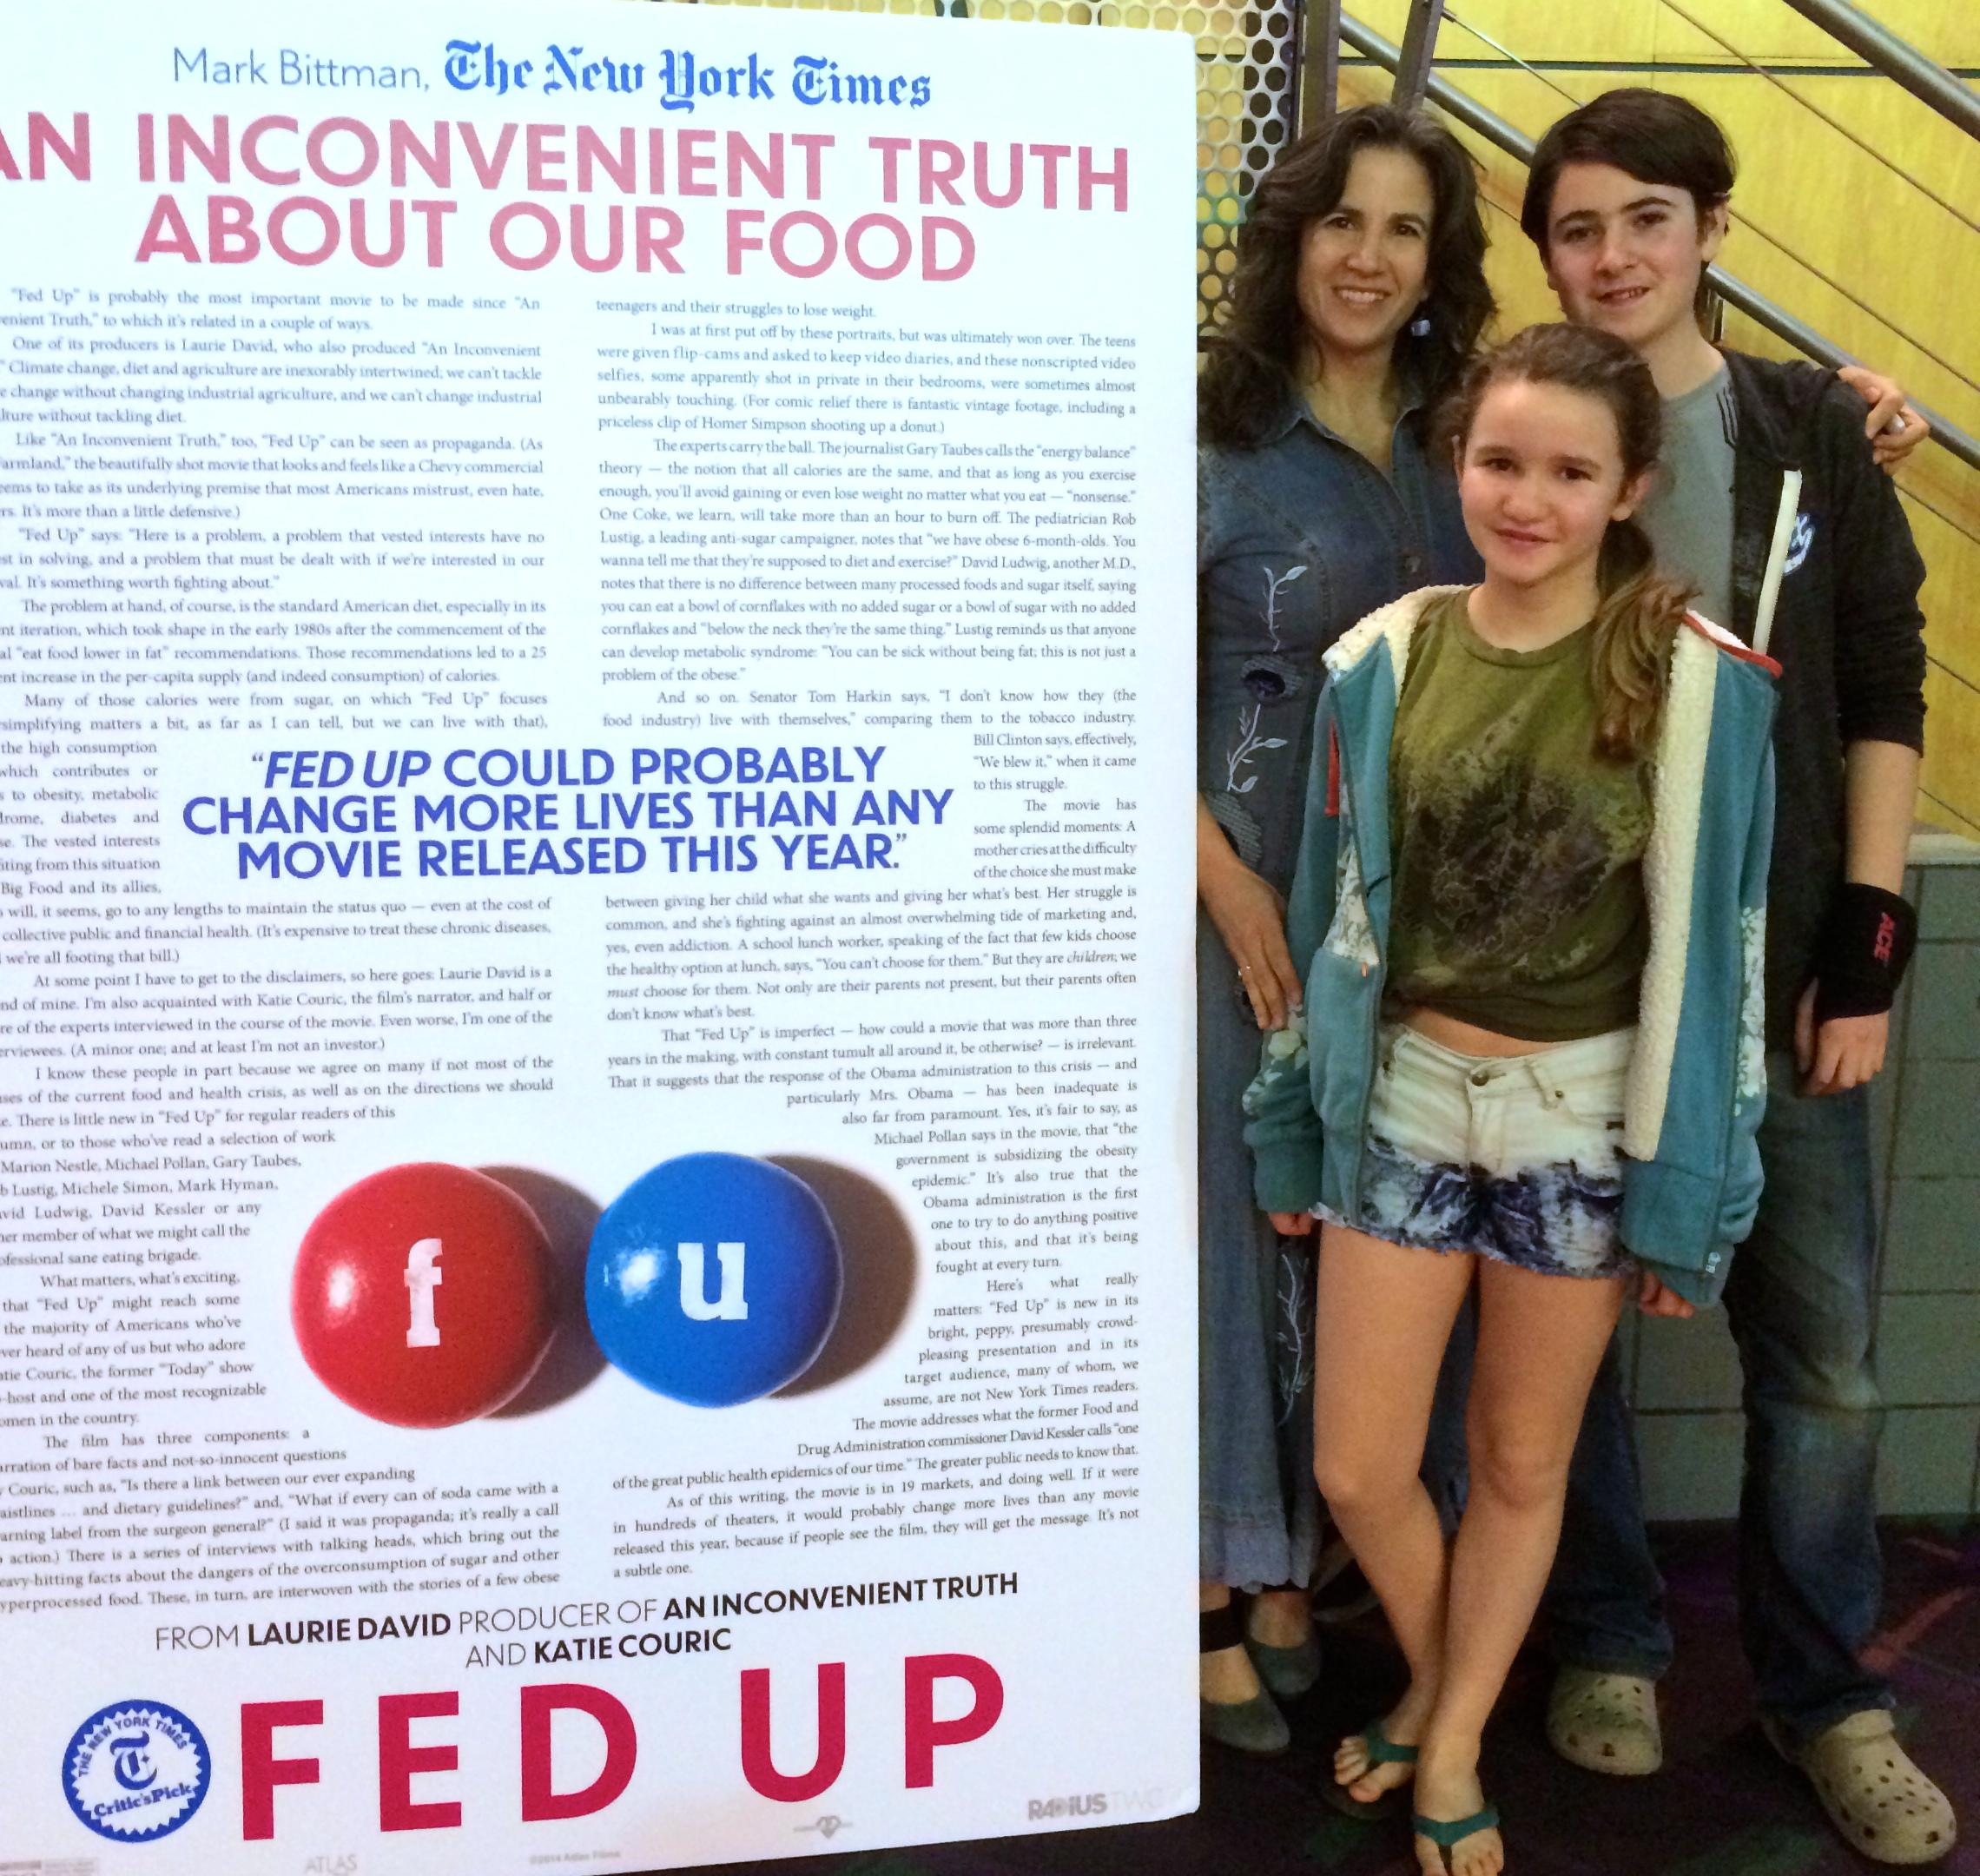 You gotta see this movie: FED UP